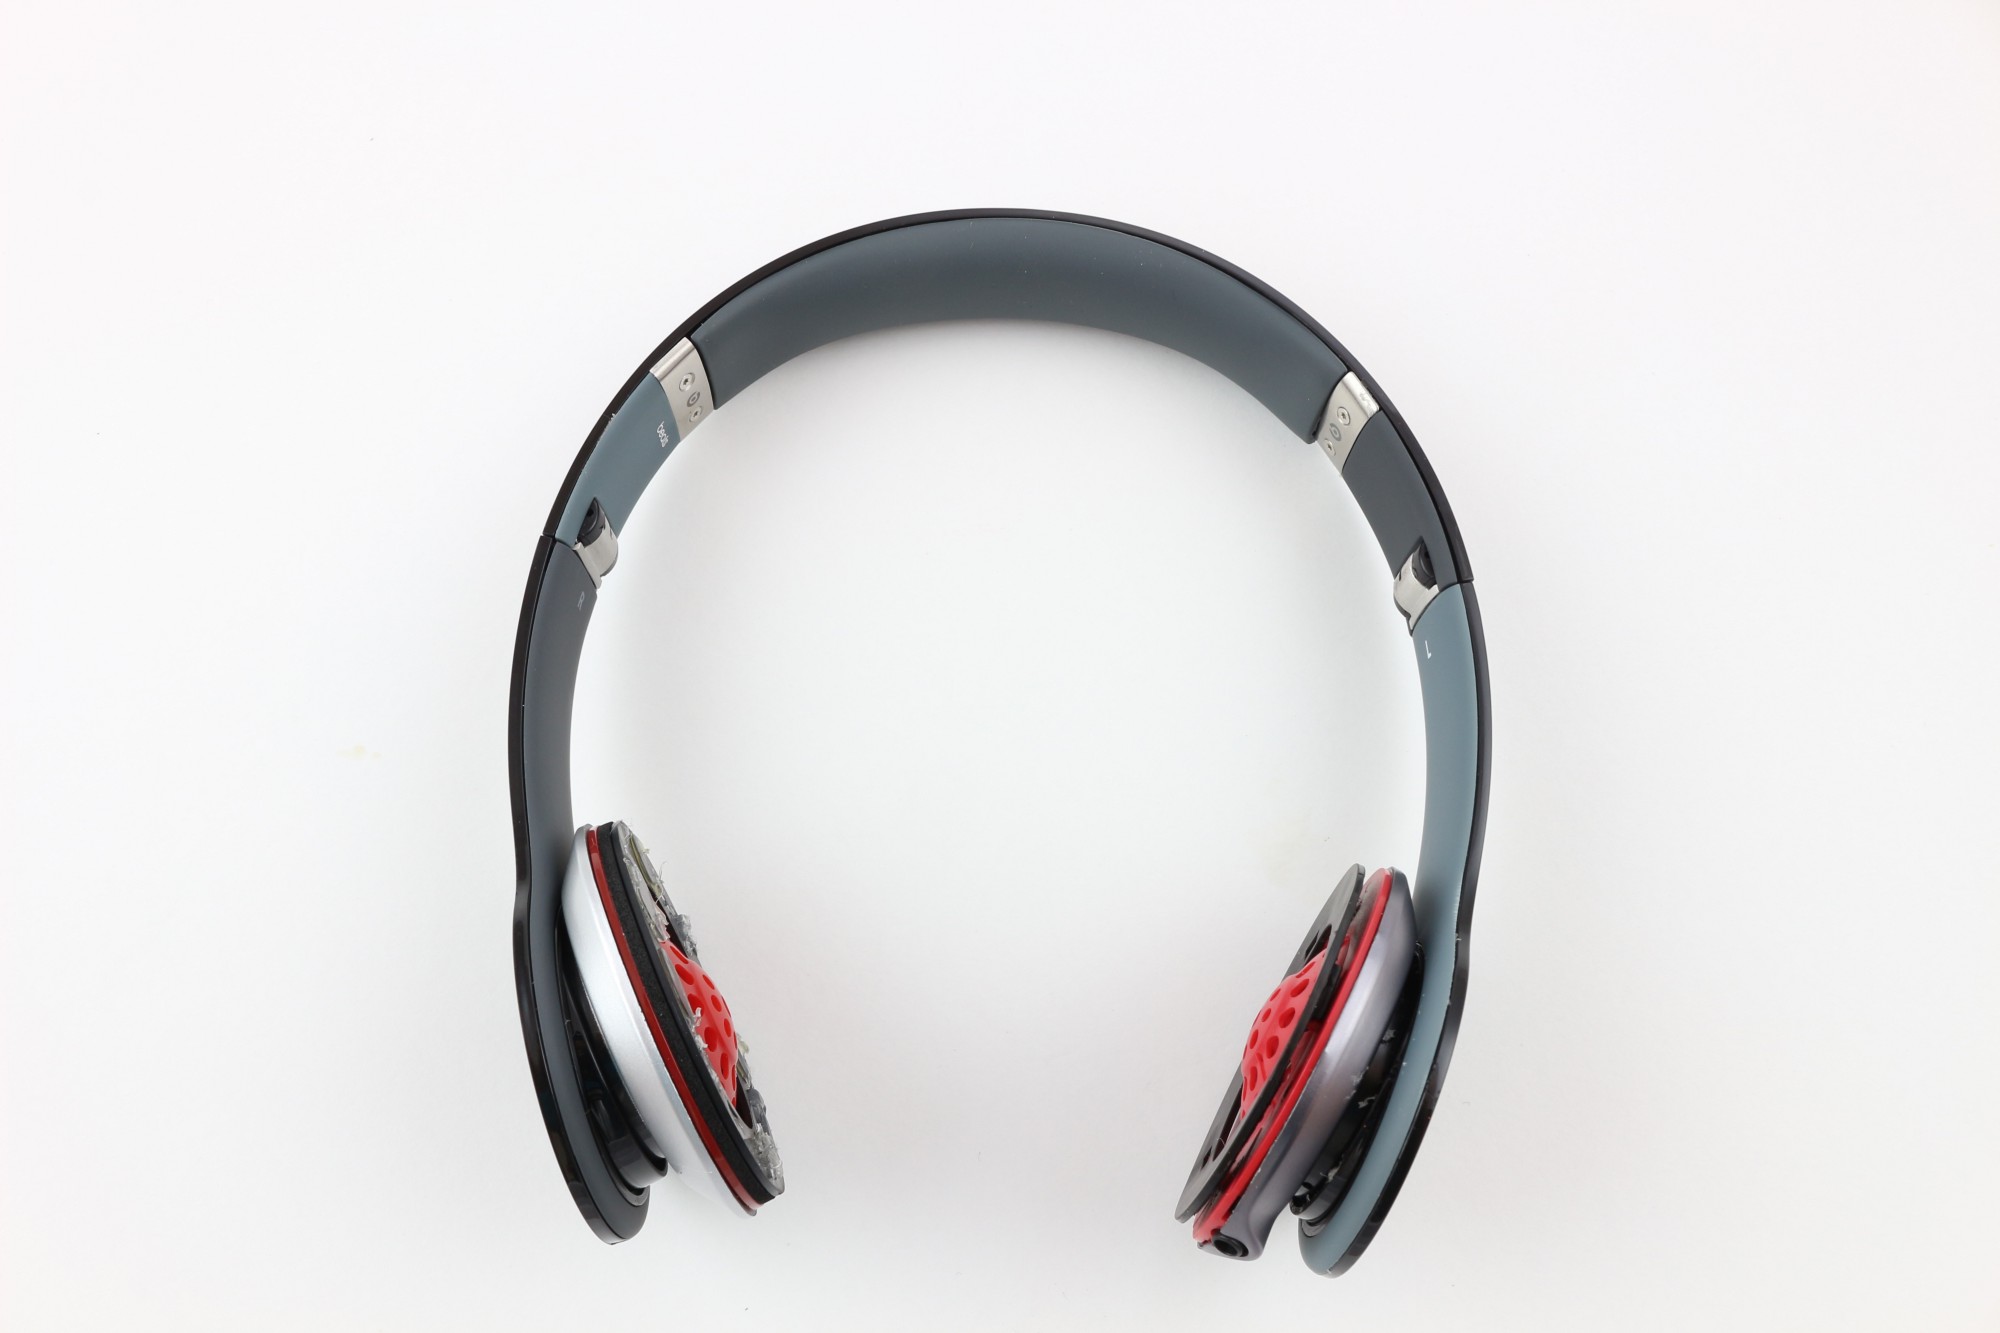 The controversy continues: dismantling shows that fake Beats headphones are very similar to the originals